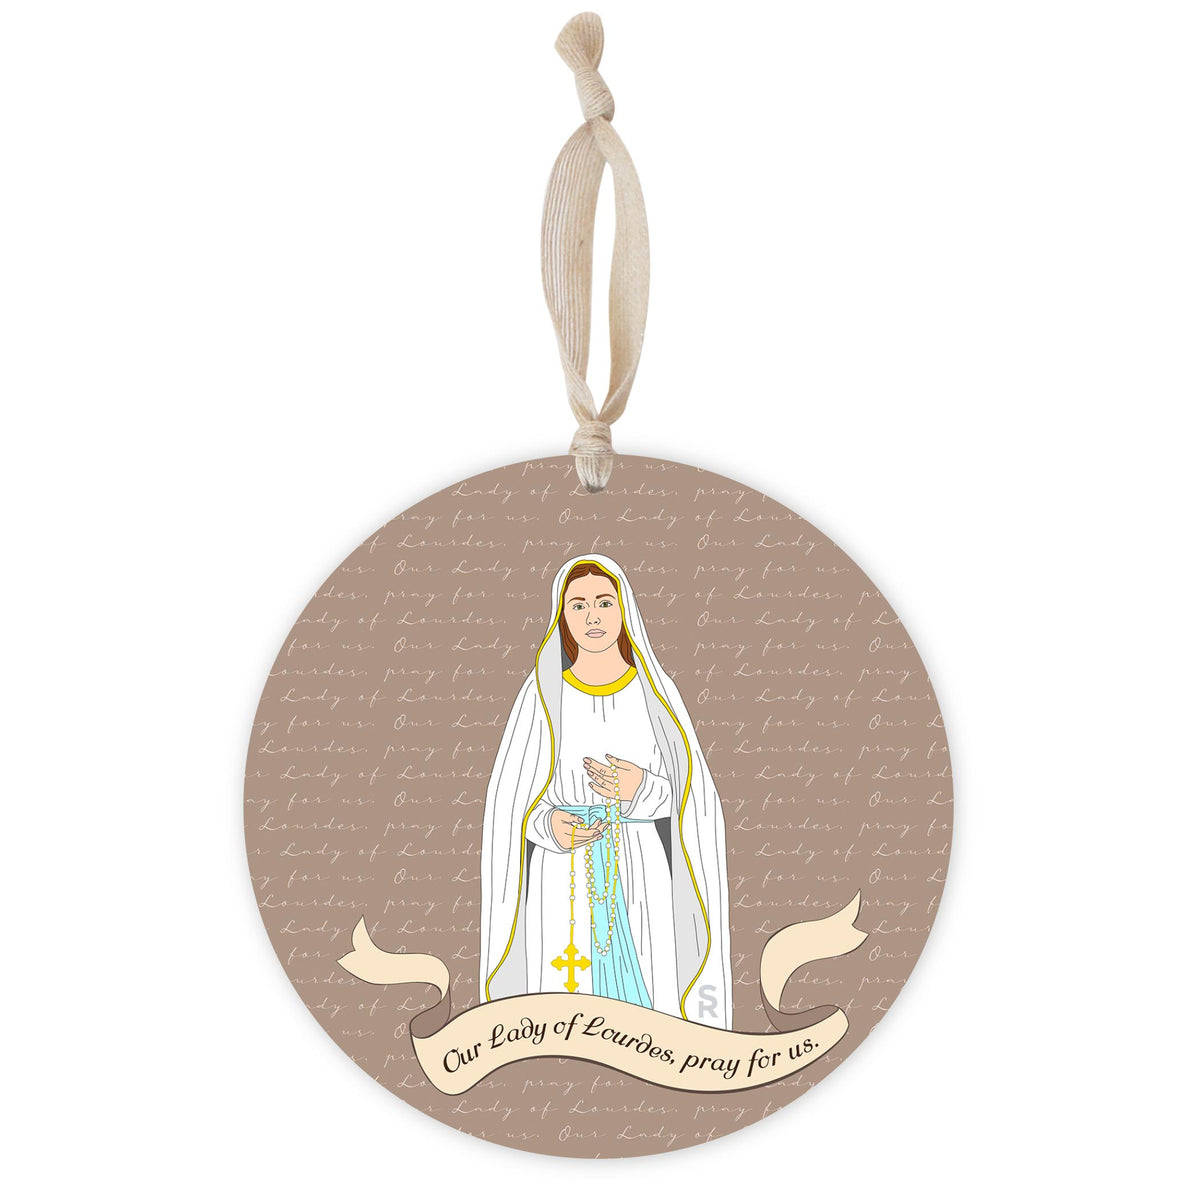 Our Lady of Lourdes 8 inch Ornament